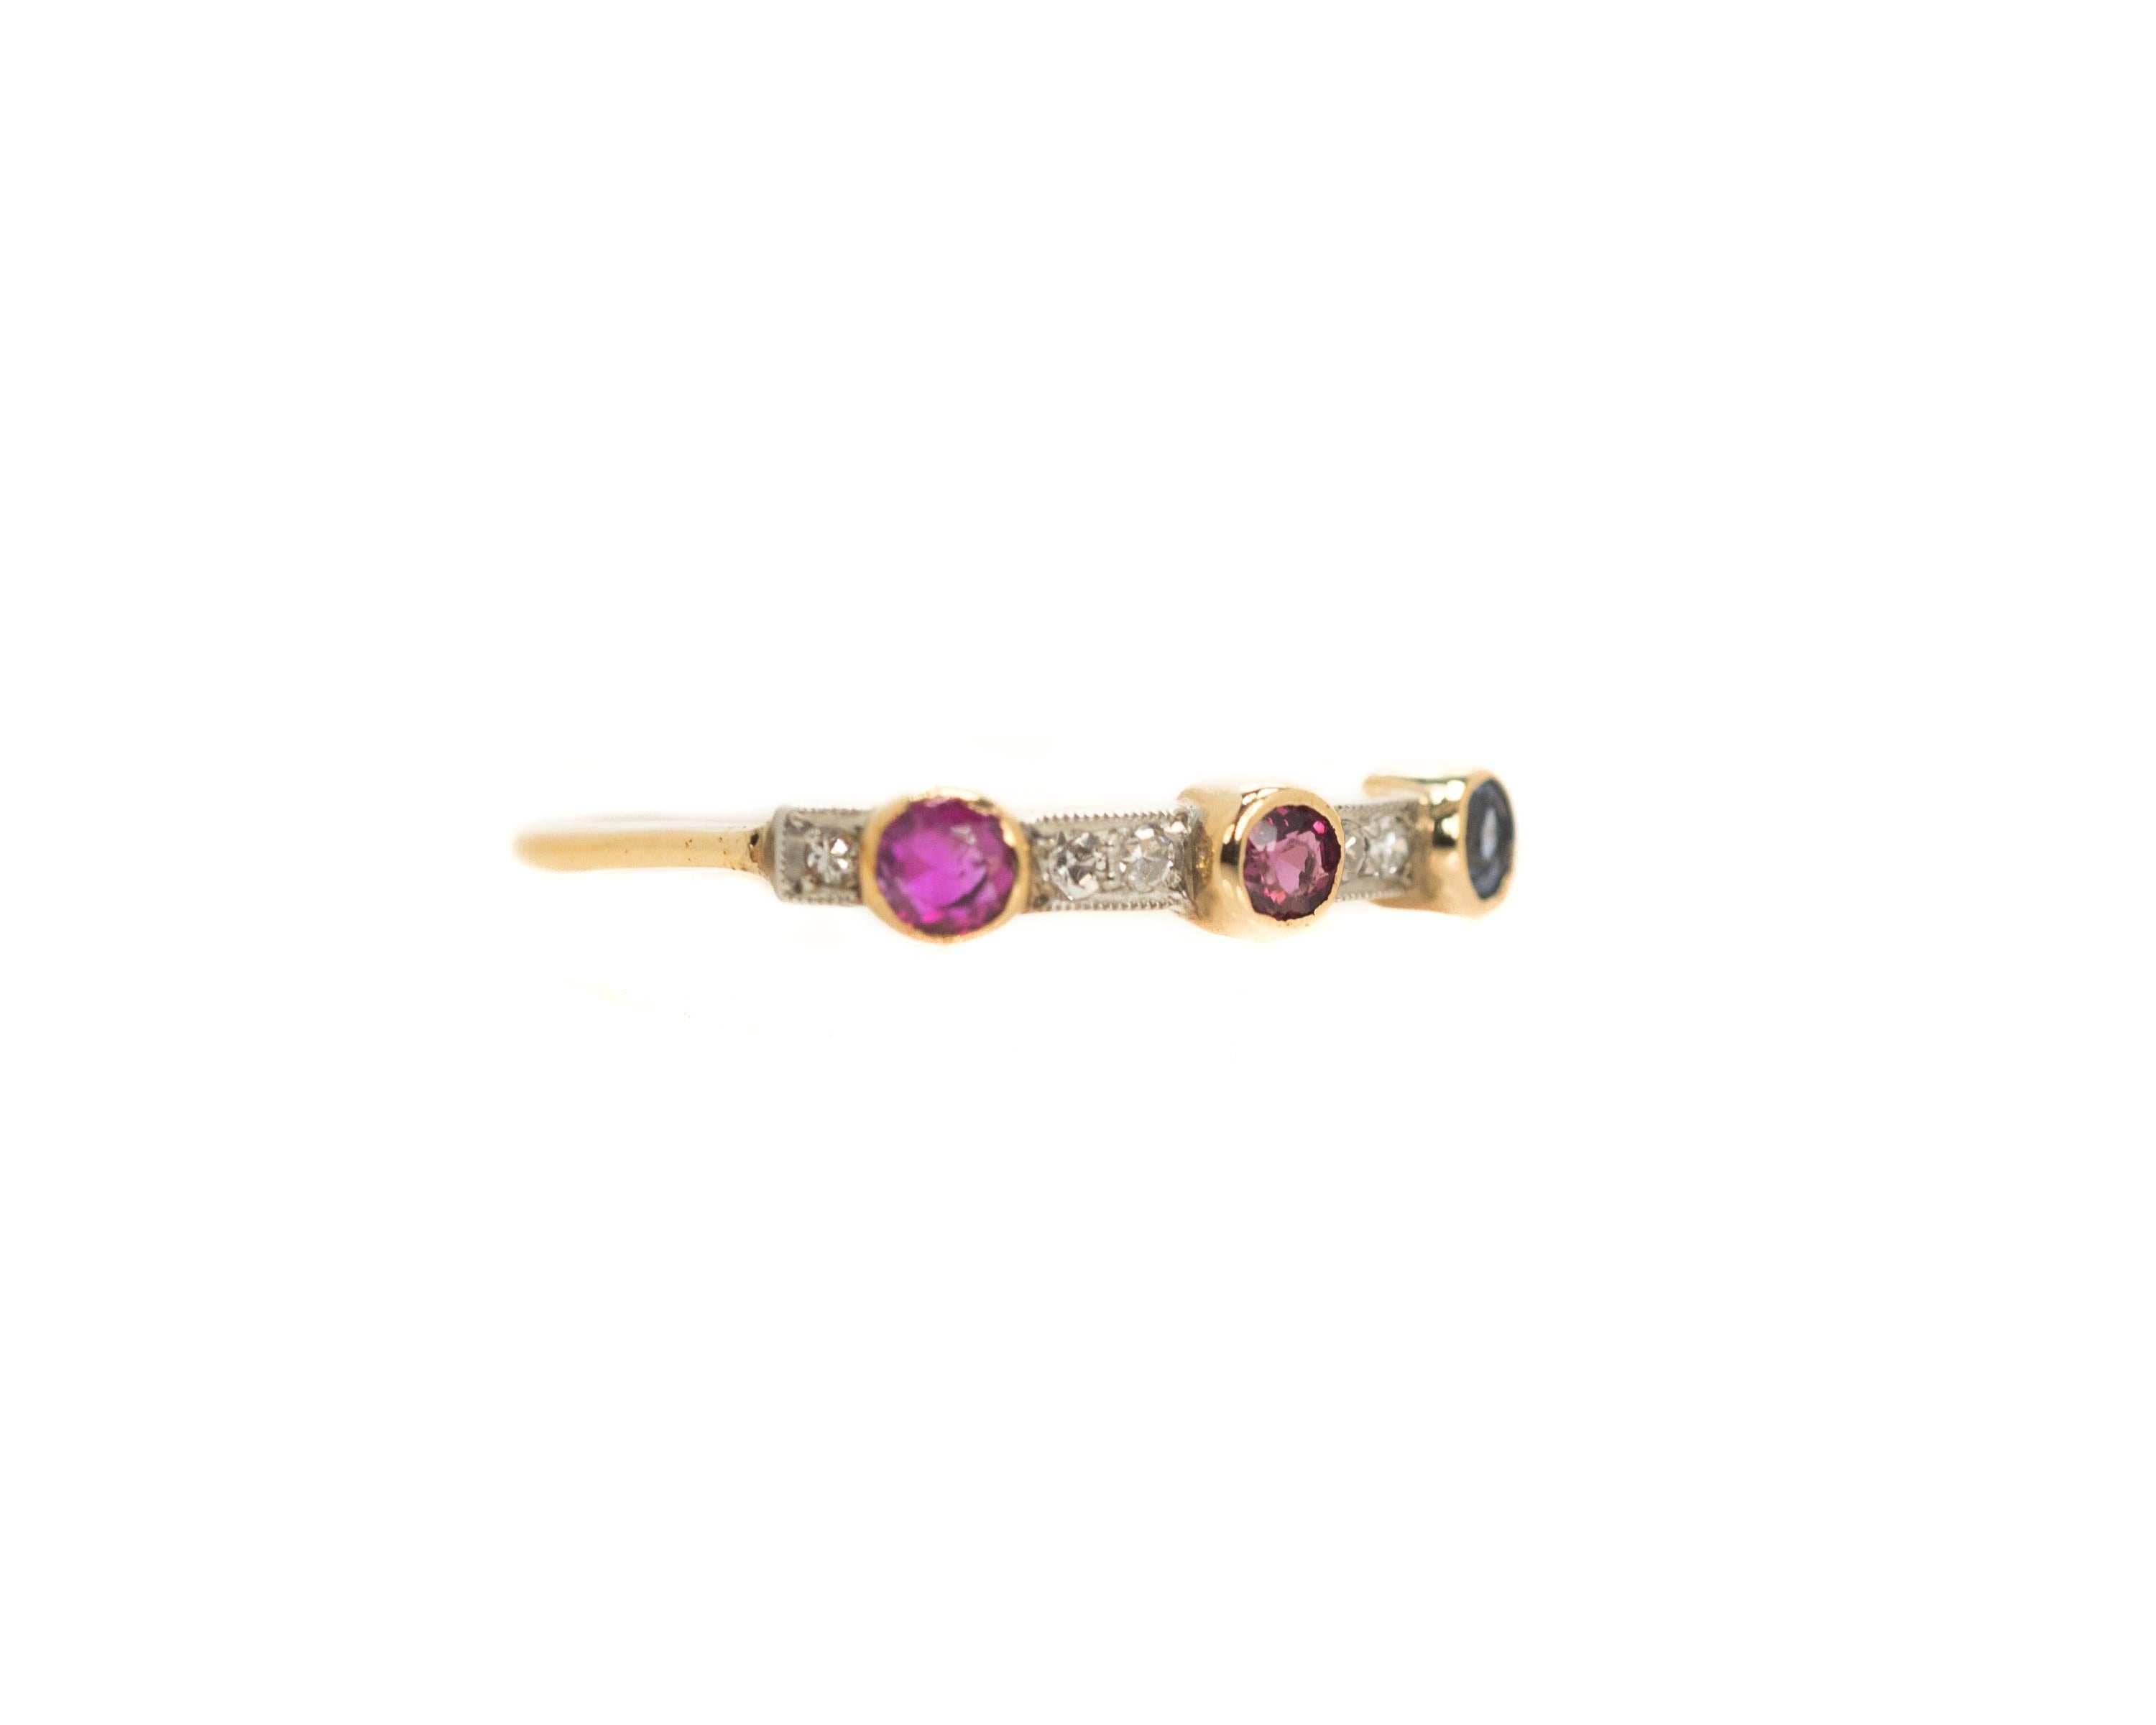 Stackable, 3 Stone, 14 Karat Two-Tone Gold, Colorful Gemstone Ring

This Stackable Ring features Colorful Gemstones set in 14K Yellow Gold and Diamonds set in 14K White Gold. The shank is crafted from 14K Yellow Gold. The rich yellow Gold